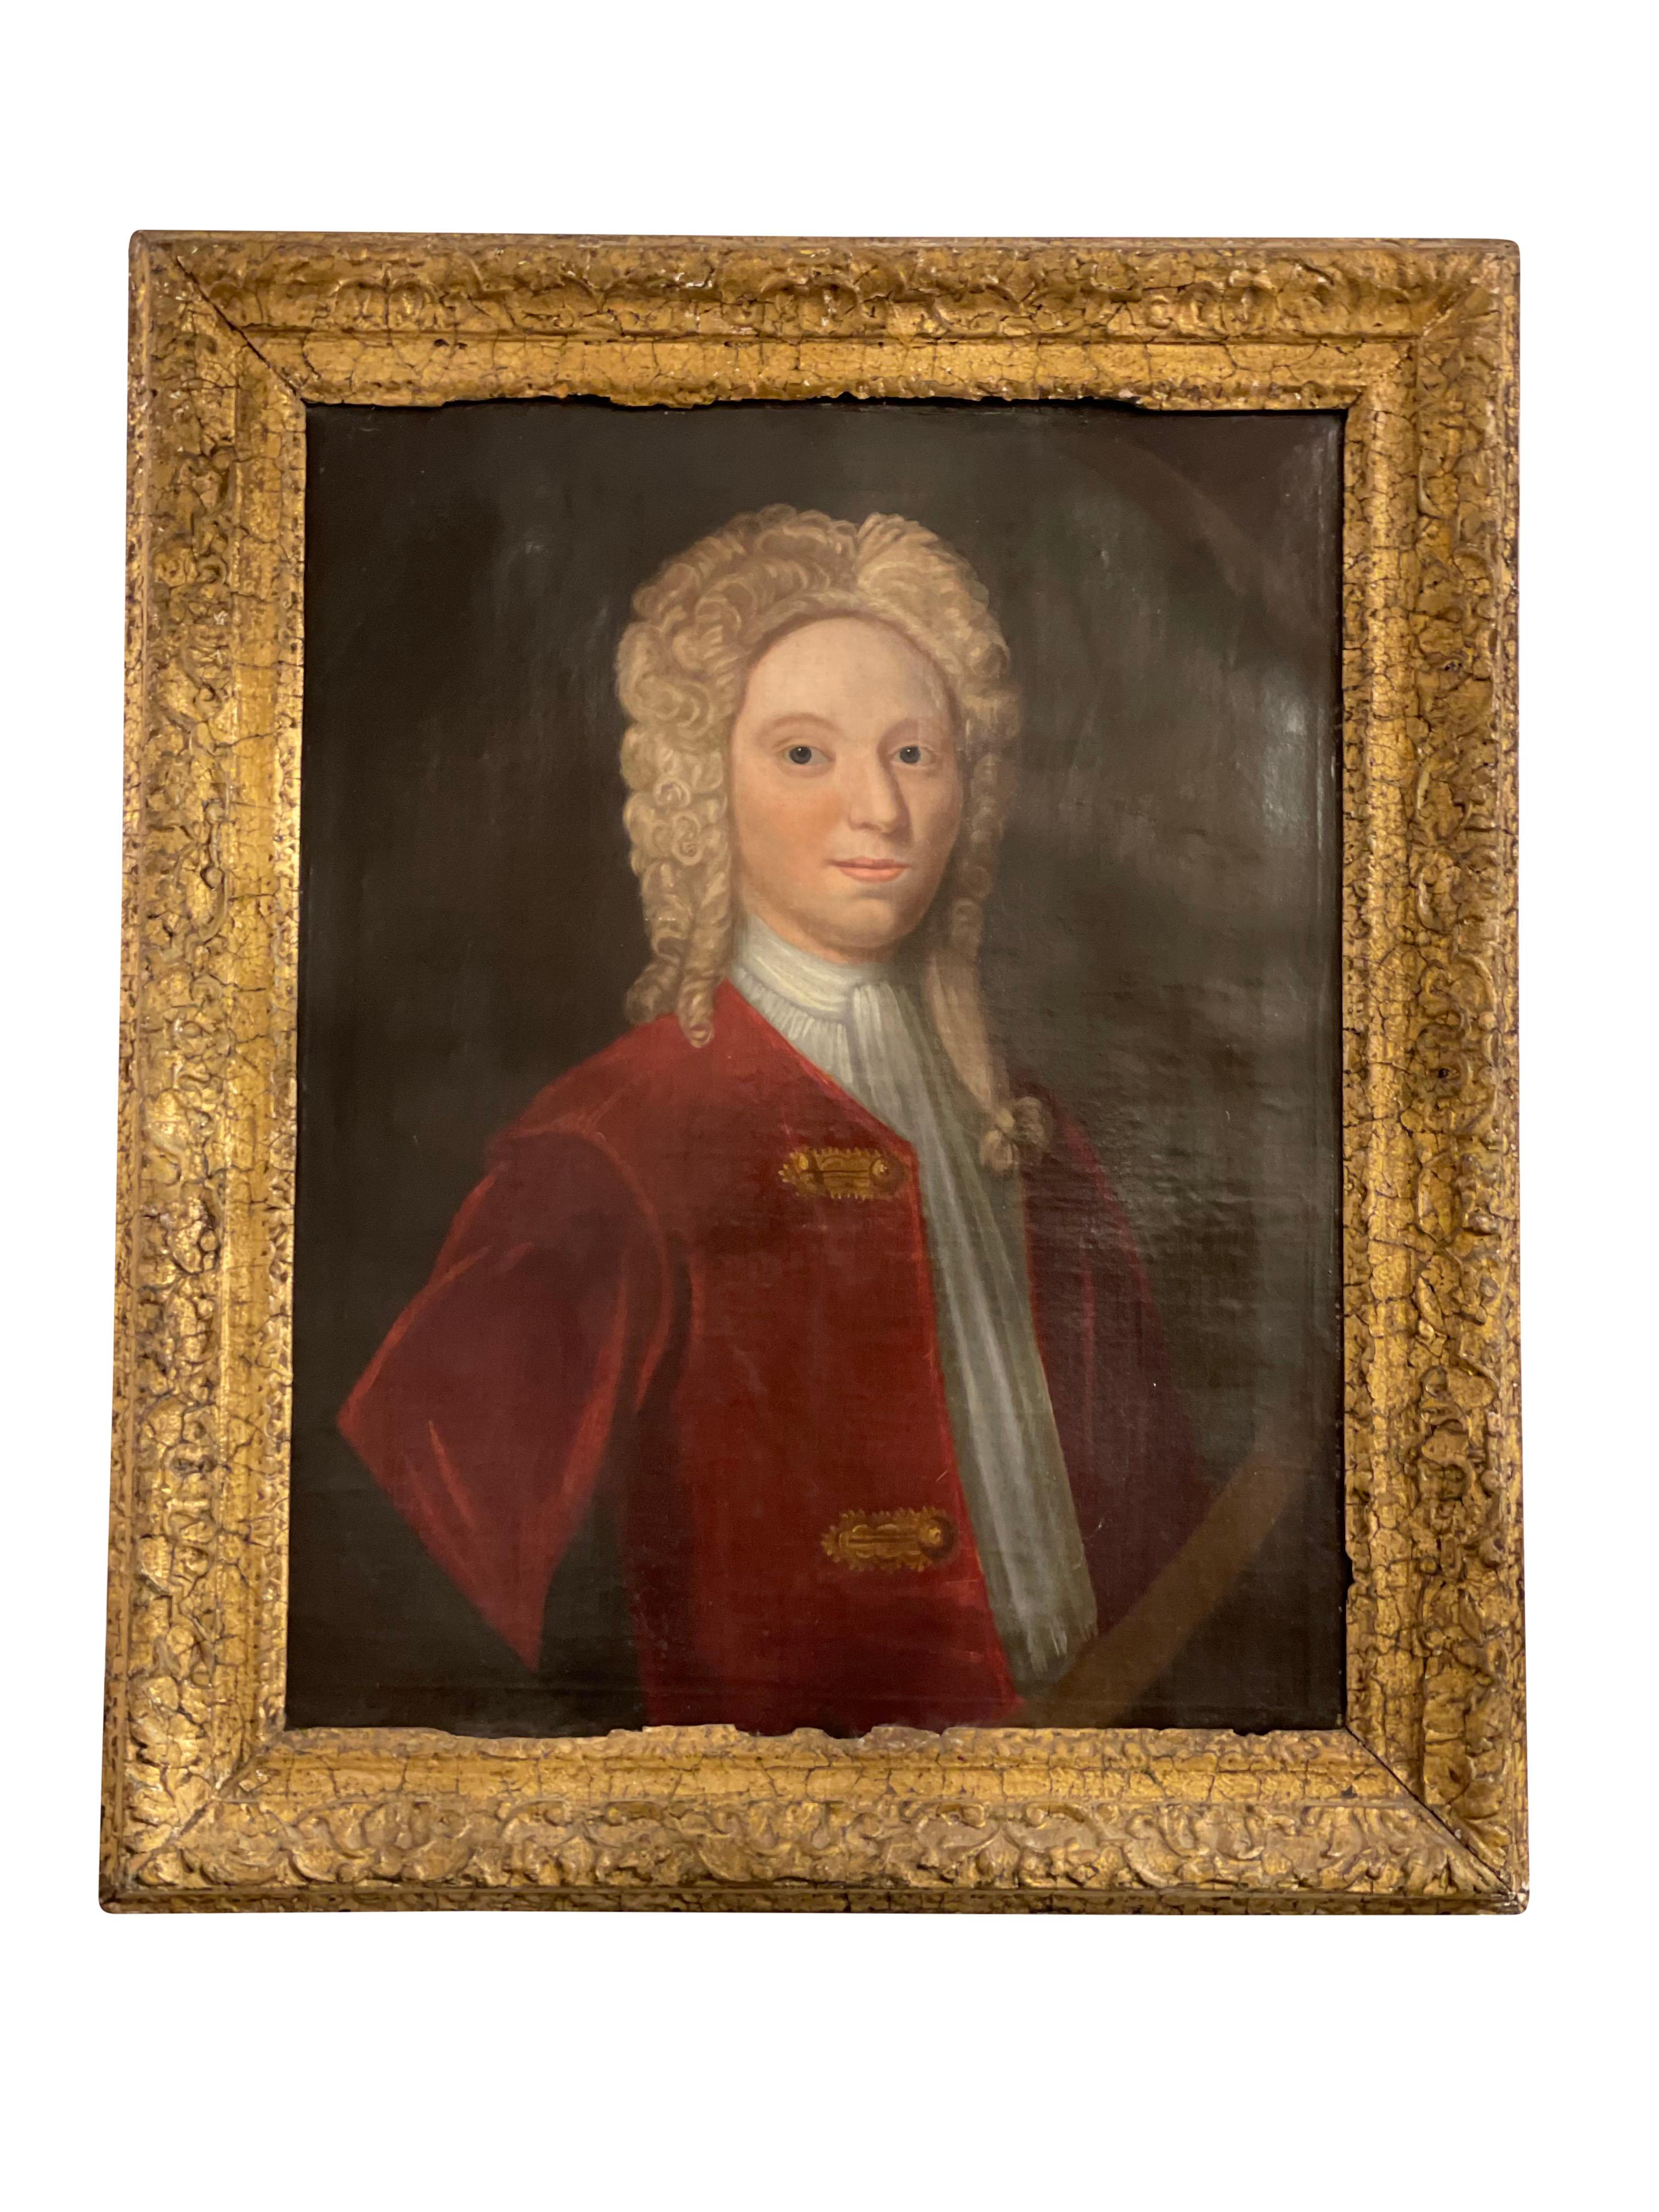 A delightful portrait of a young gentleman in a brilliant scarlet jacket with large gold buttons. offered with original hand carved wooden frame.